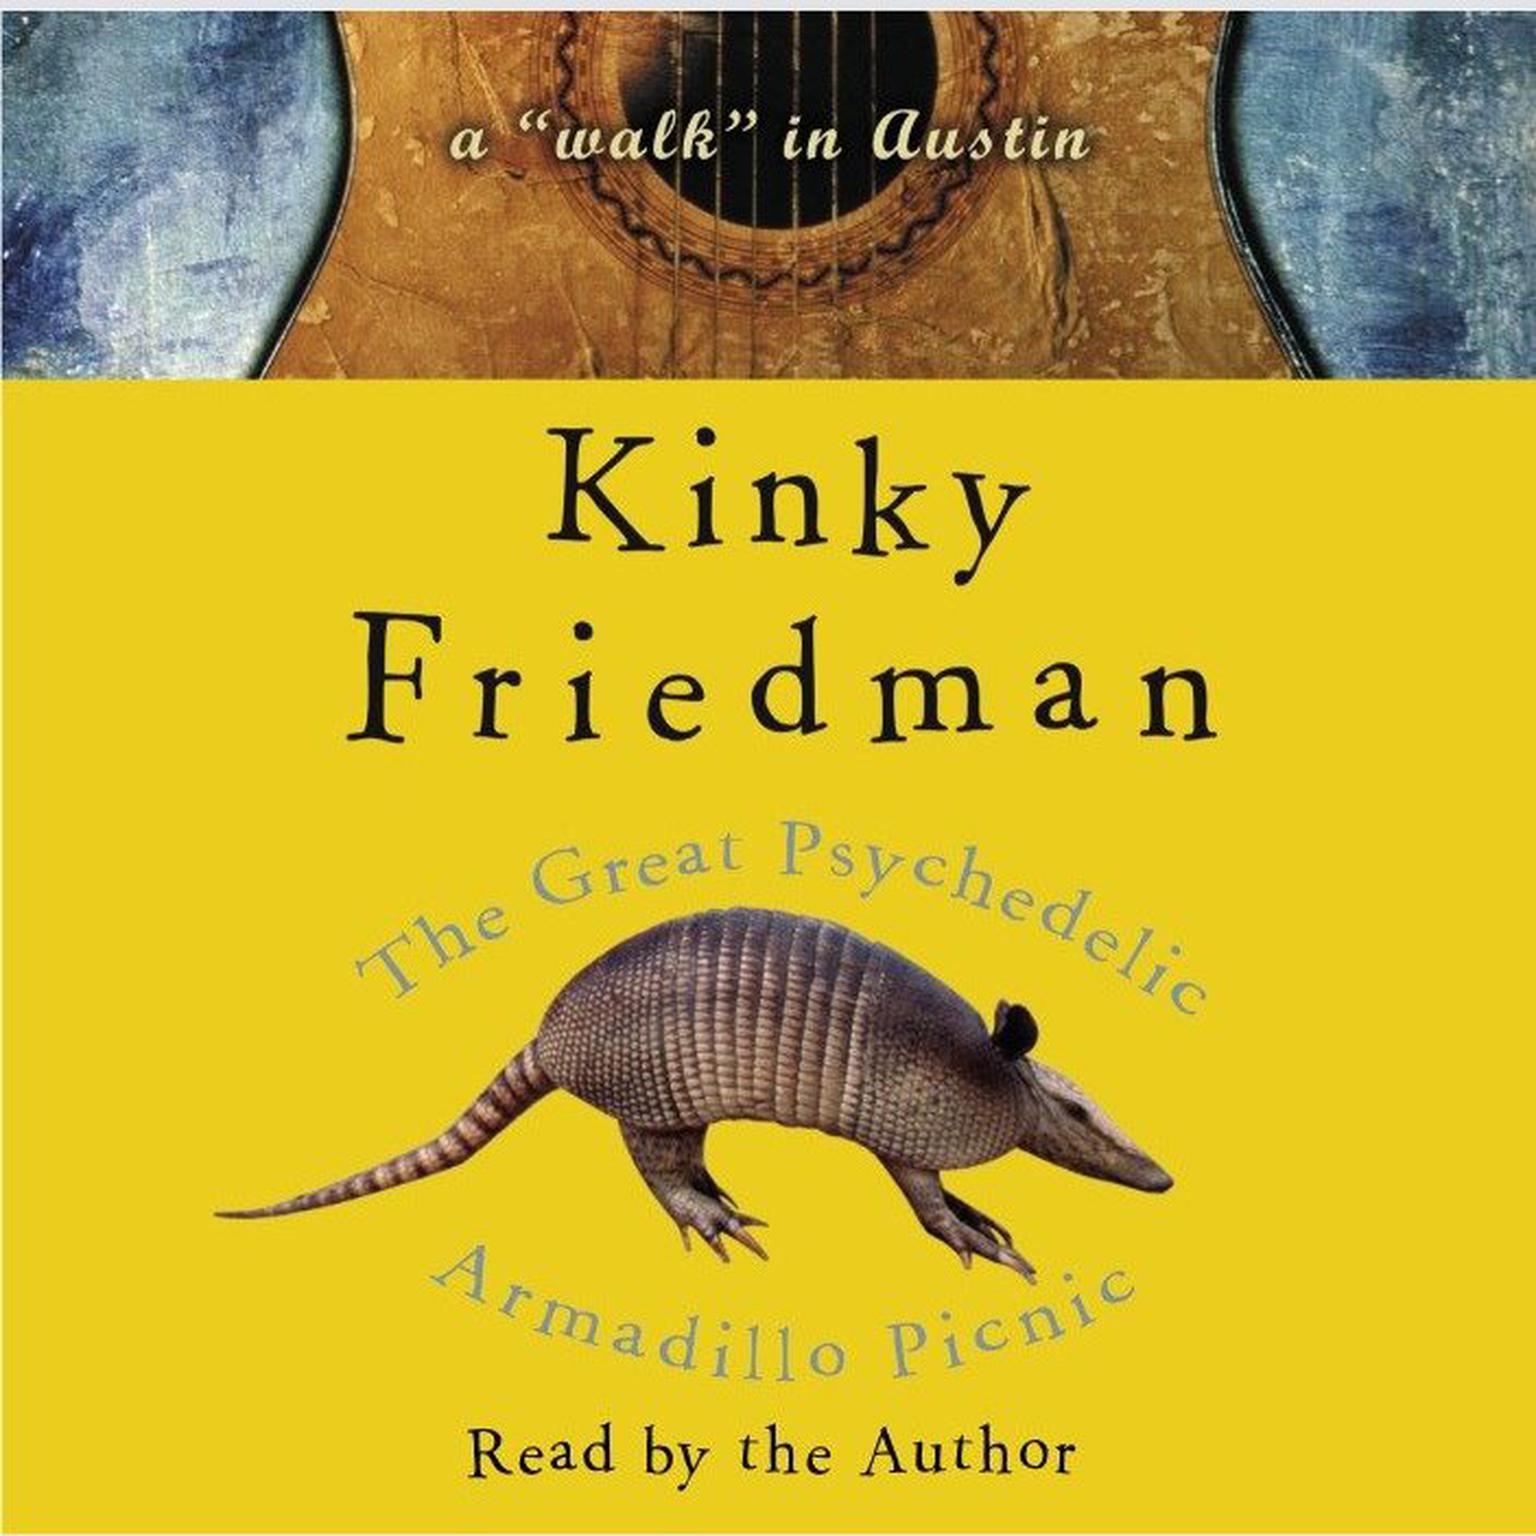 The Great Psychedelic Armadillo Picnic (Abridged): A Walk in Austin Audiobook, by Kinky Friedman